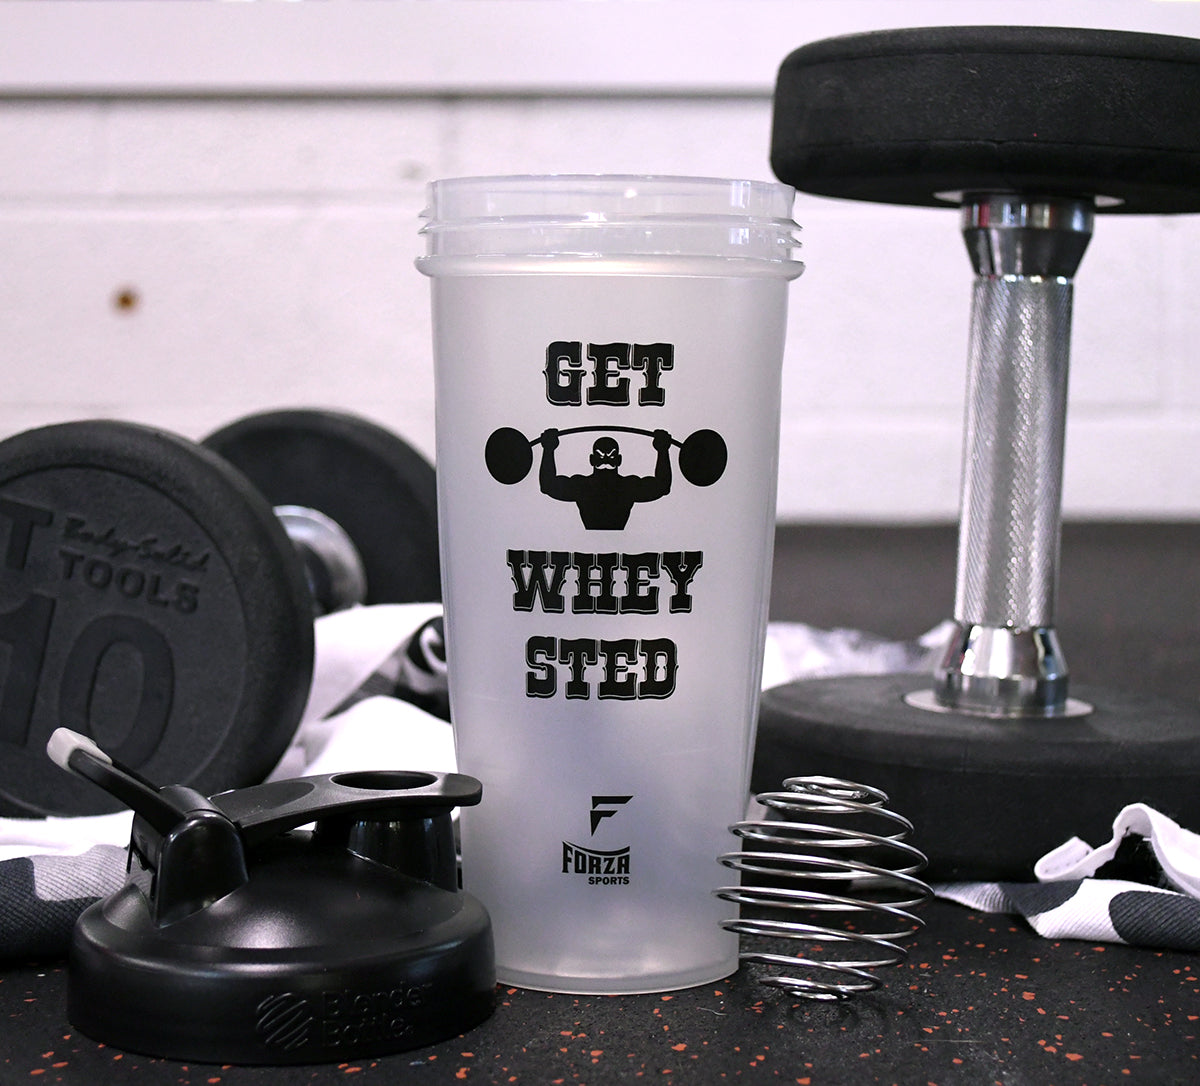 Blender Bottle x Forza Sports Classic 28 oz. Shaker Mixer Cup with Loop Top Forza Sports